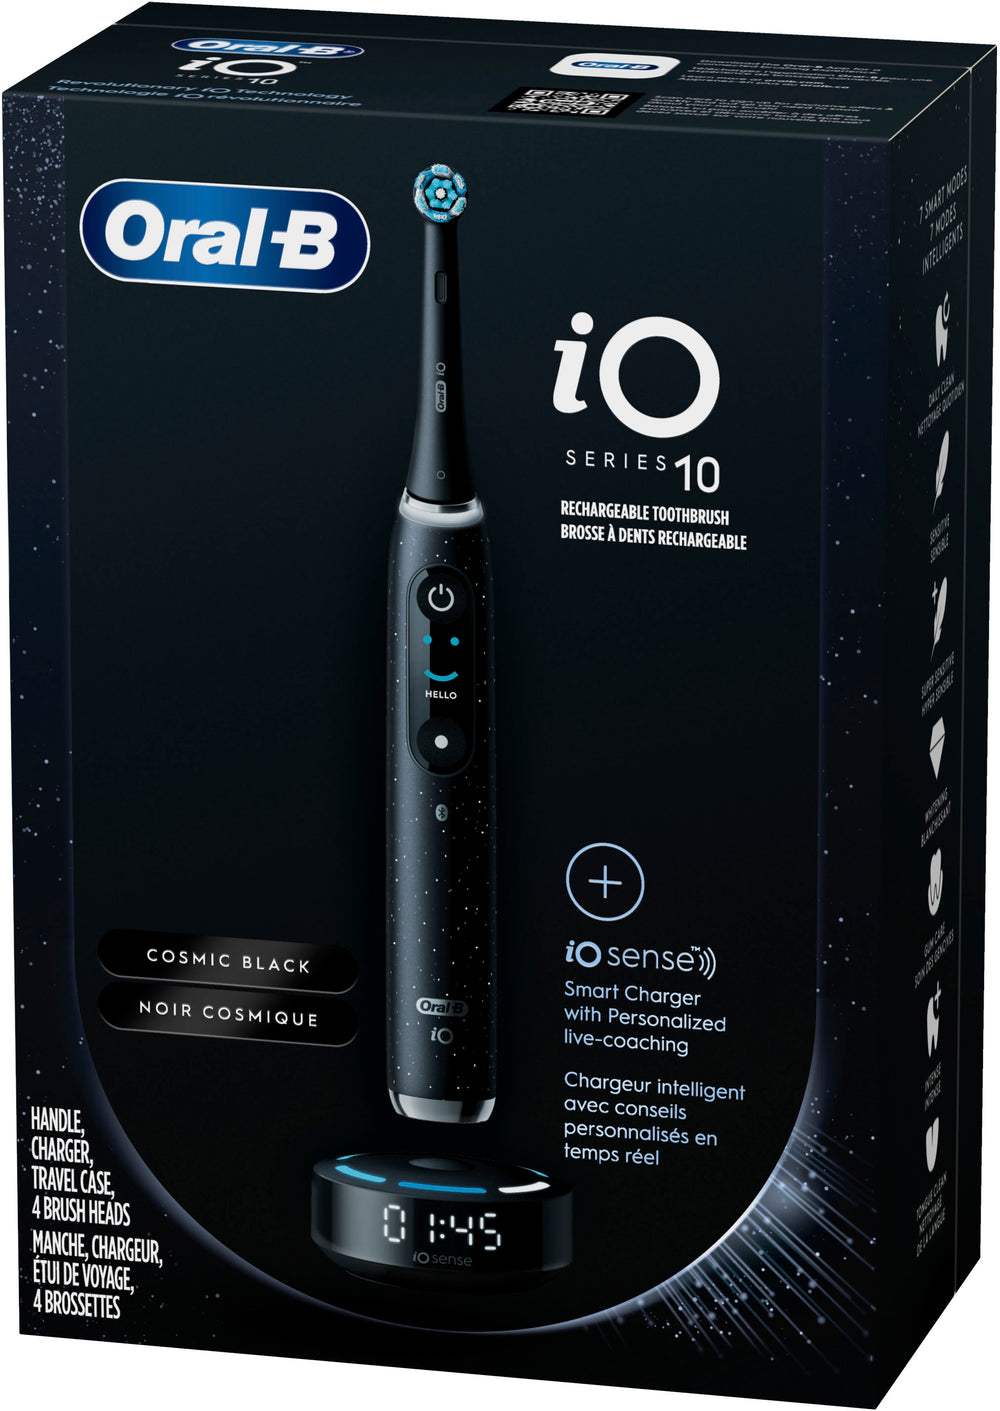 Oral-B - iO Series 10 Rechargeable Electric Toothbrush - Black_1